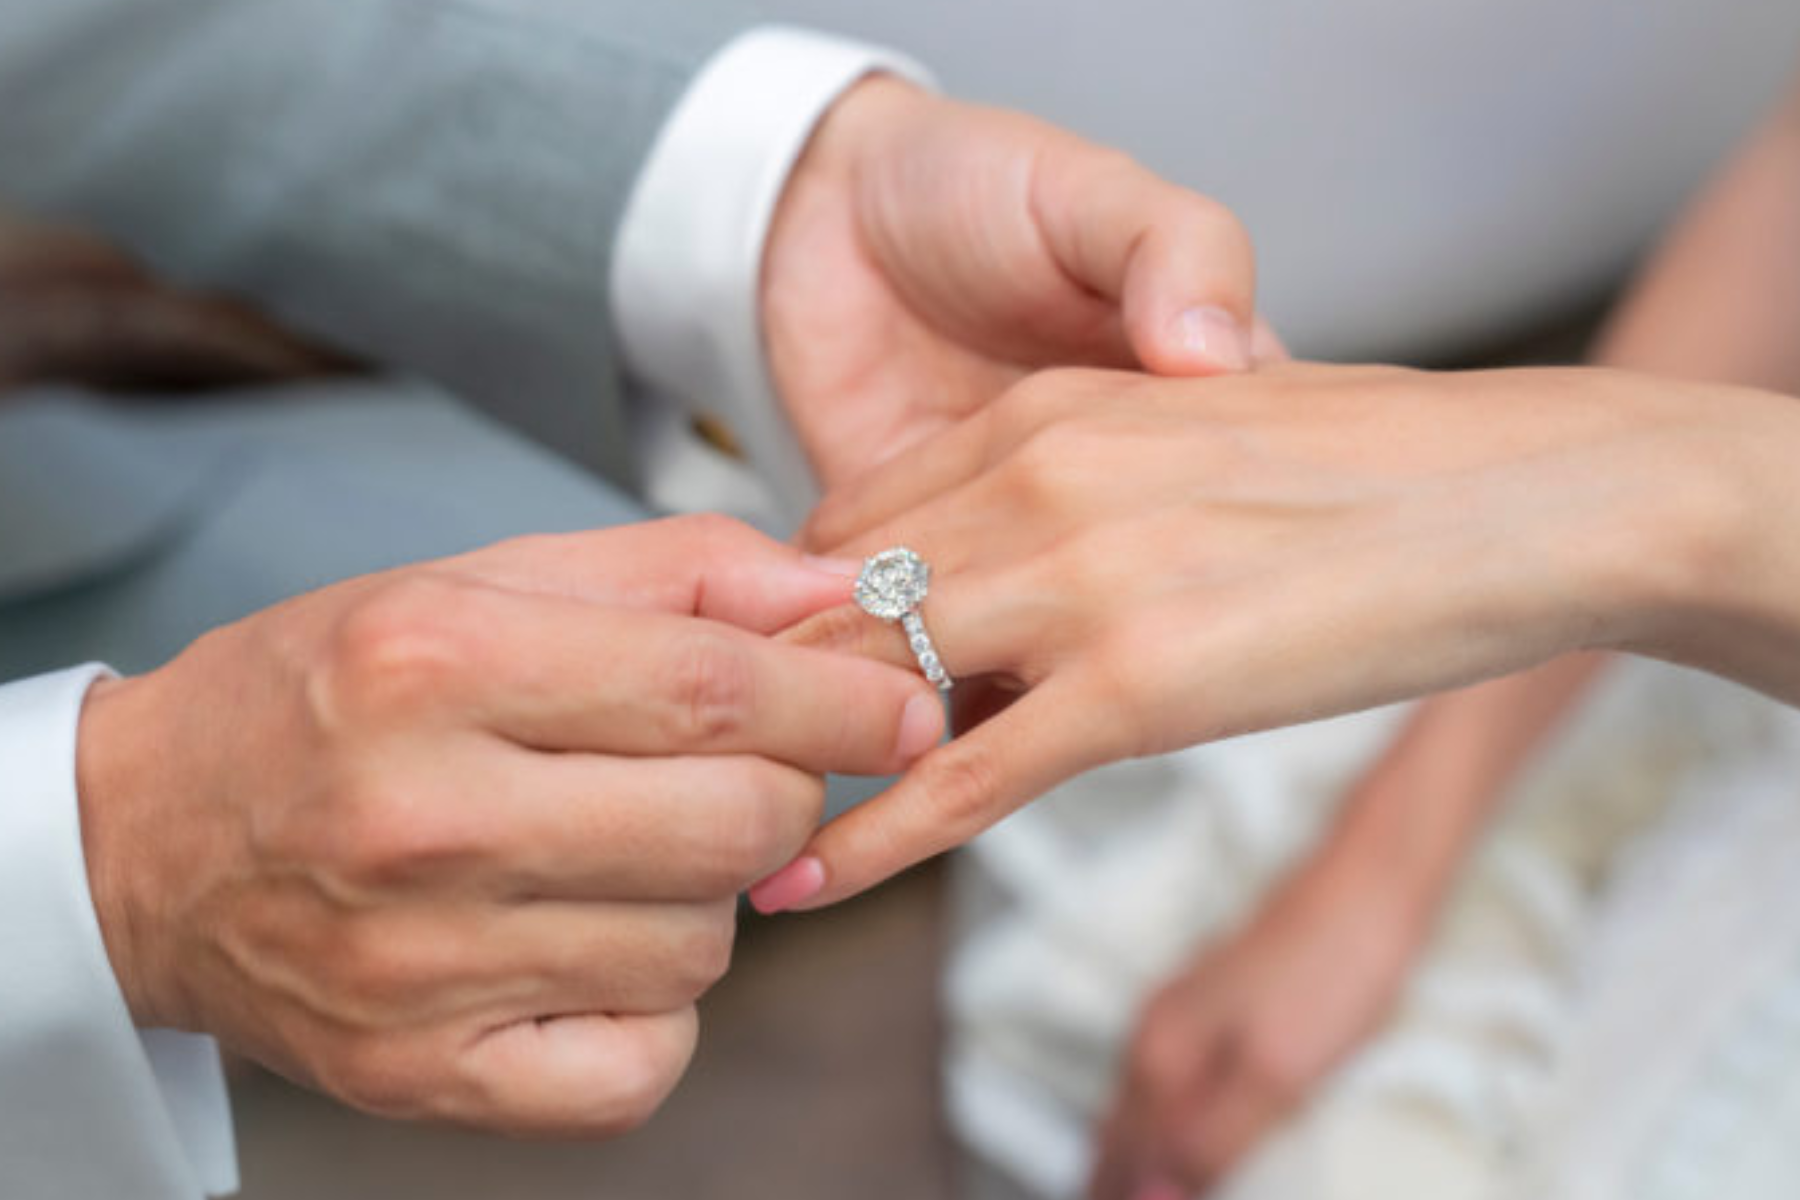 How Much Money Should You Spend On A Wedding Ring - The Cost Of Commitment